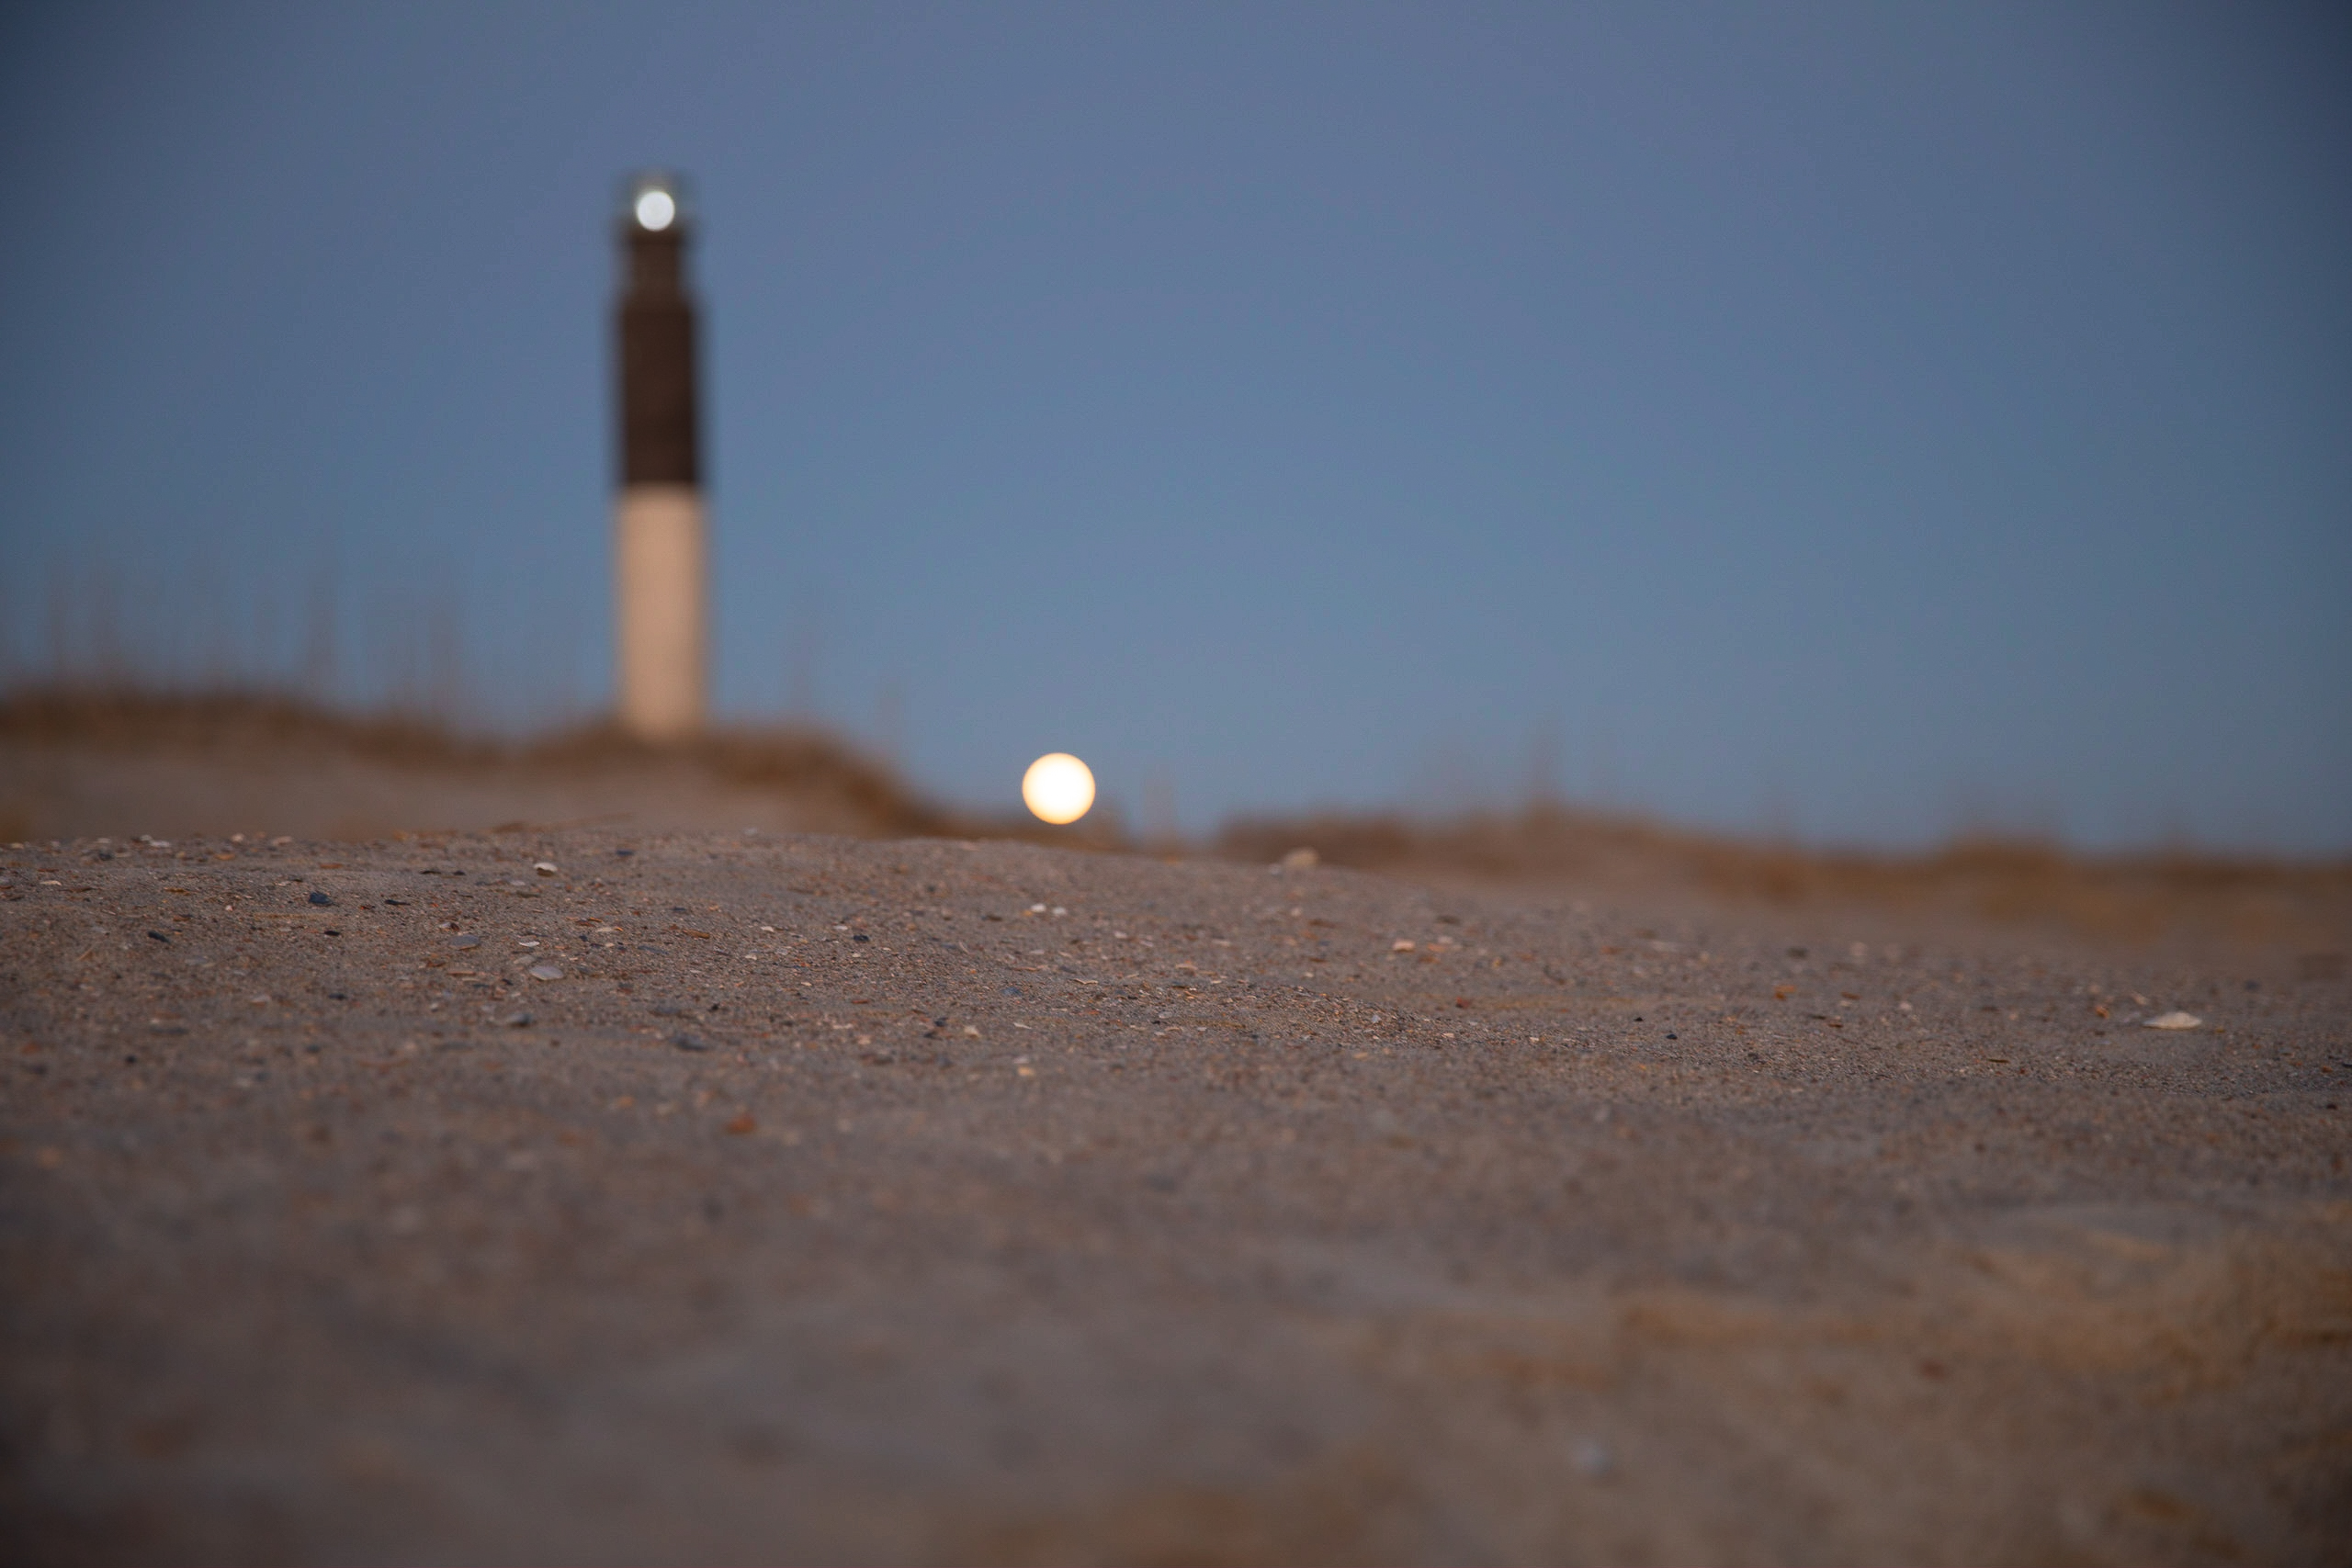 lighthouse and moon